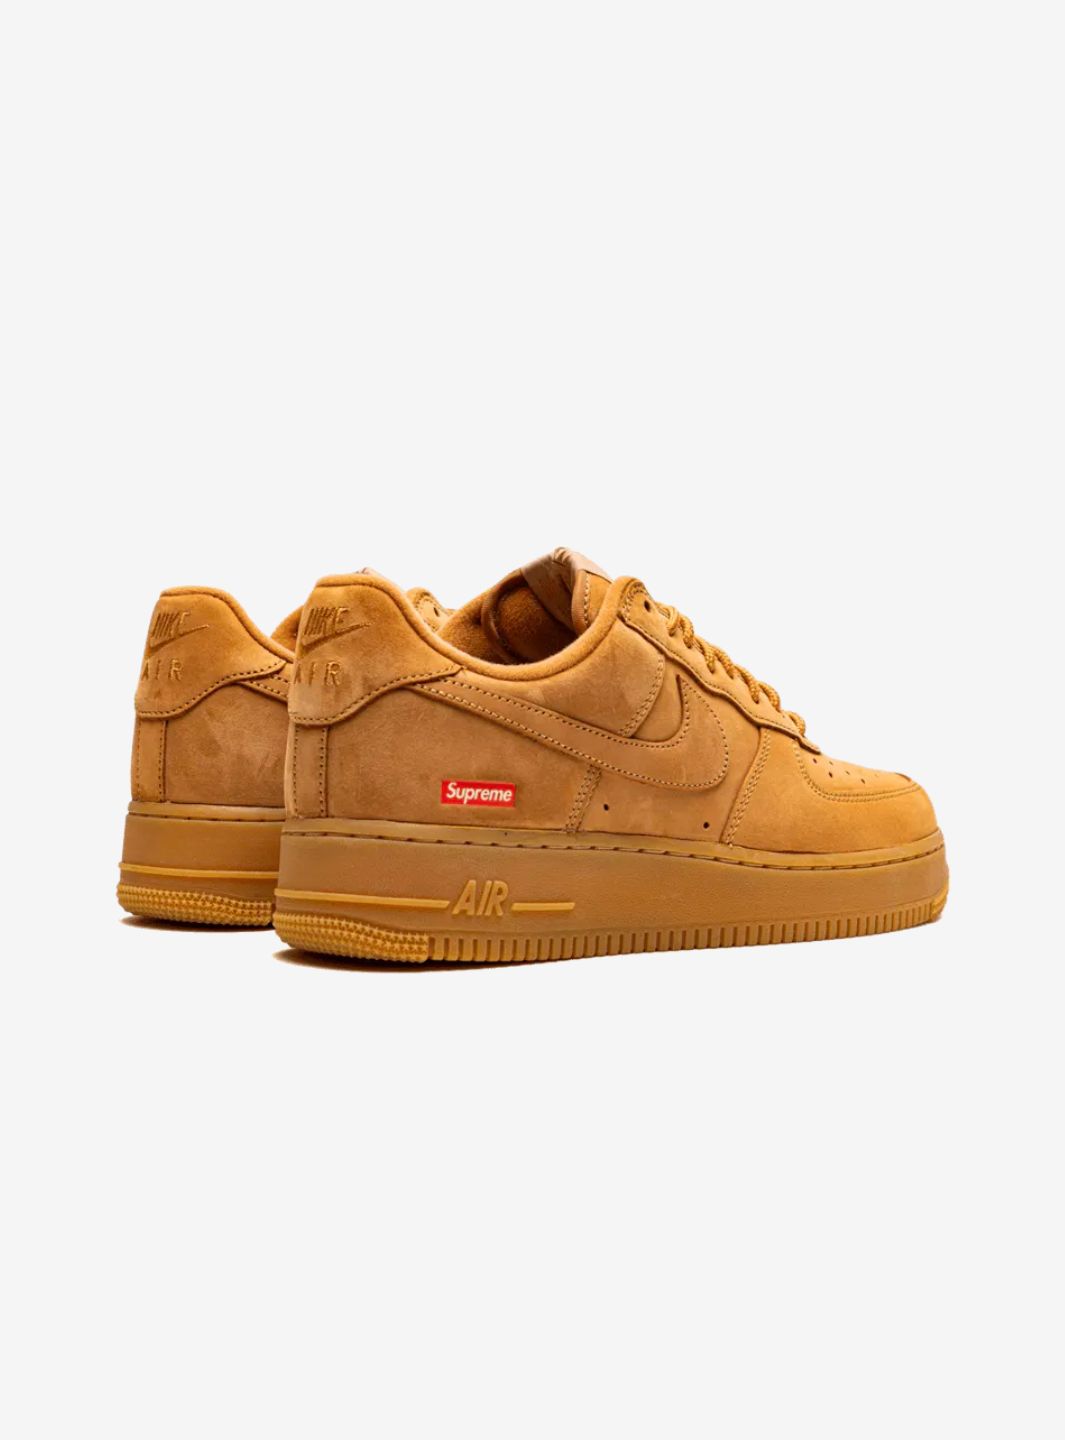 Nike Air Force 1 Low Supreme Flax - DN1555-200 | ResellZone